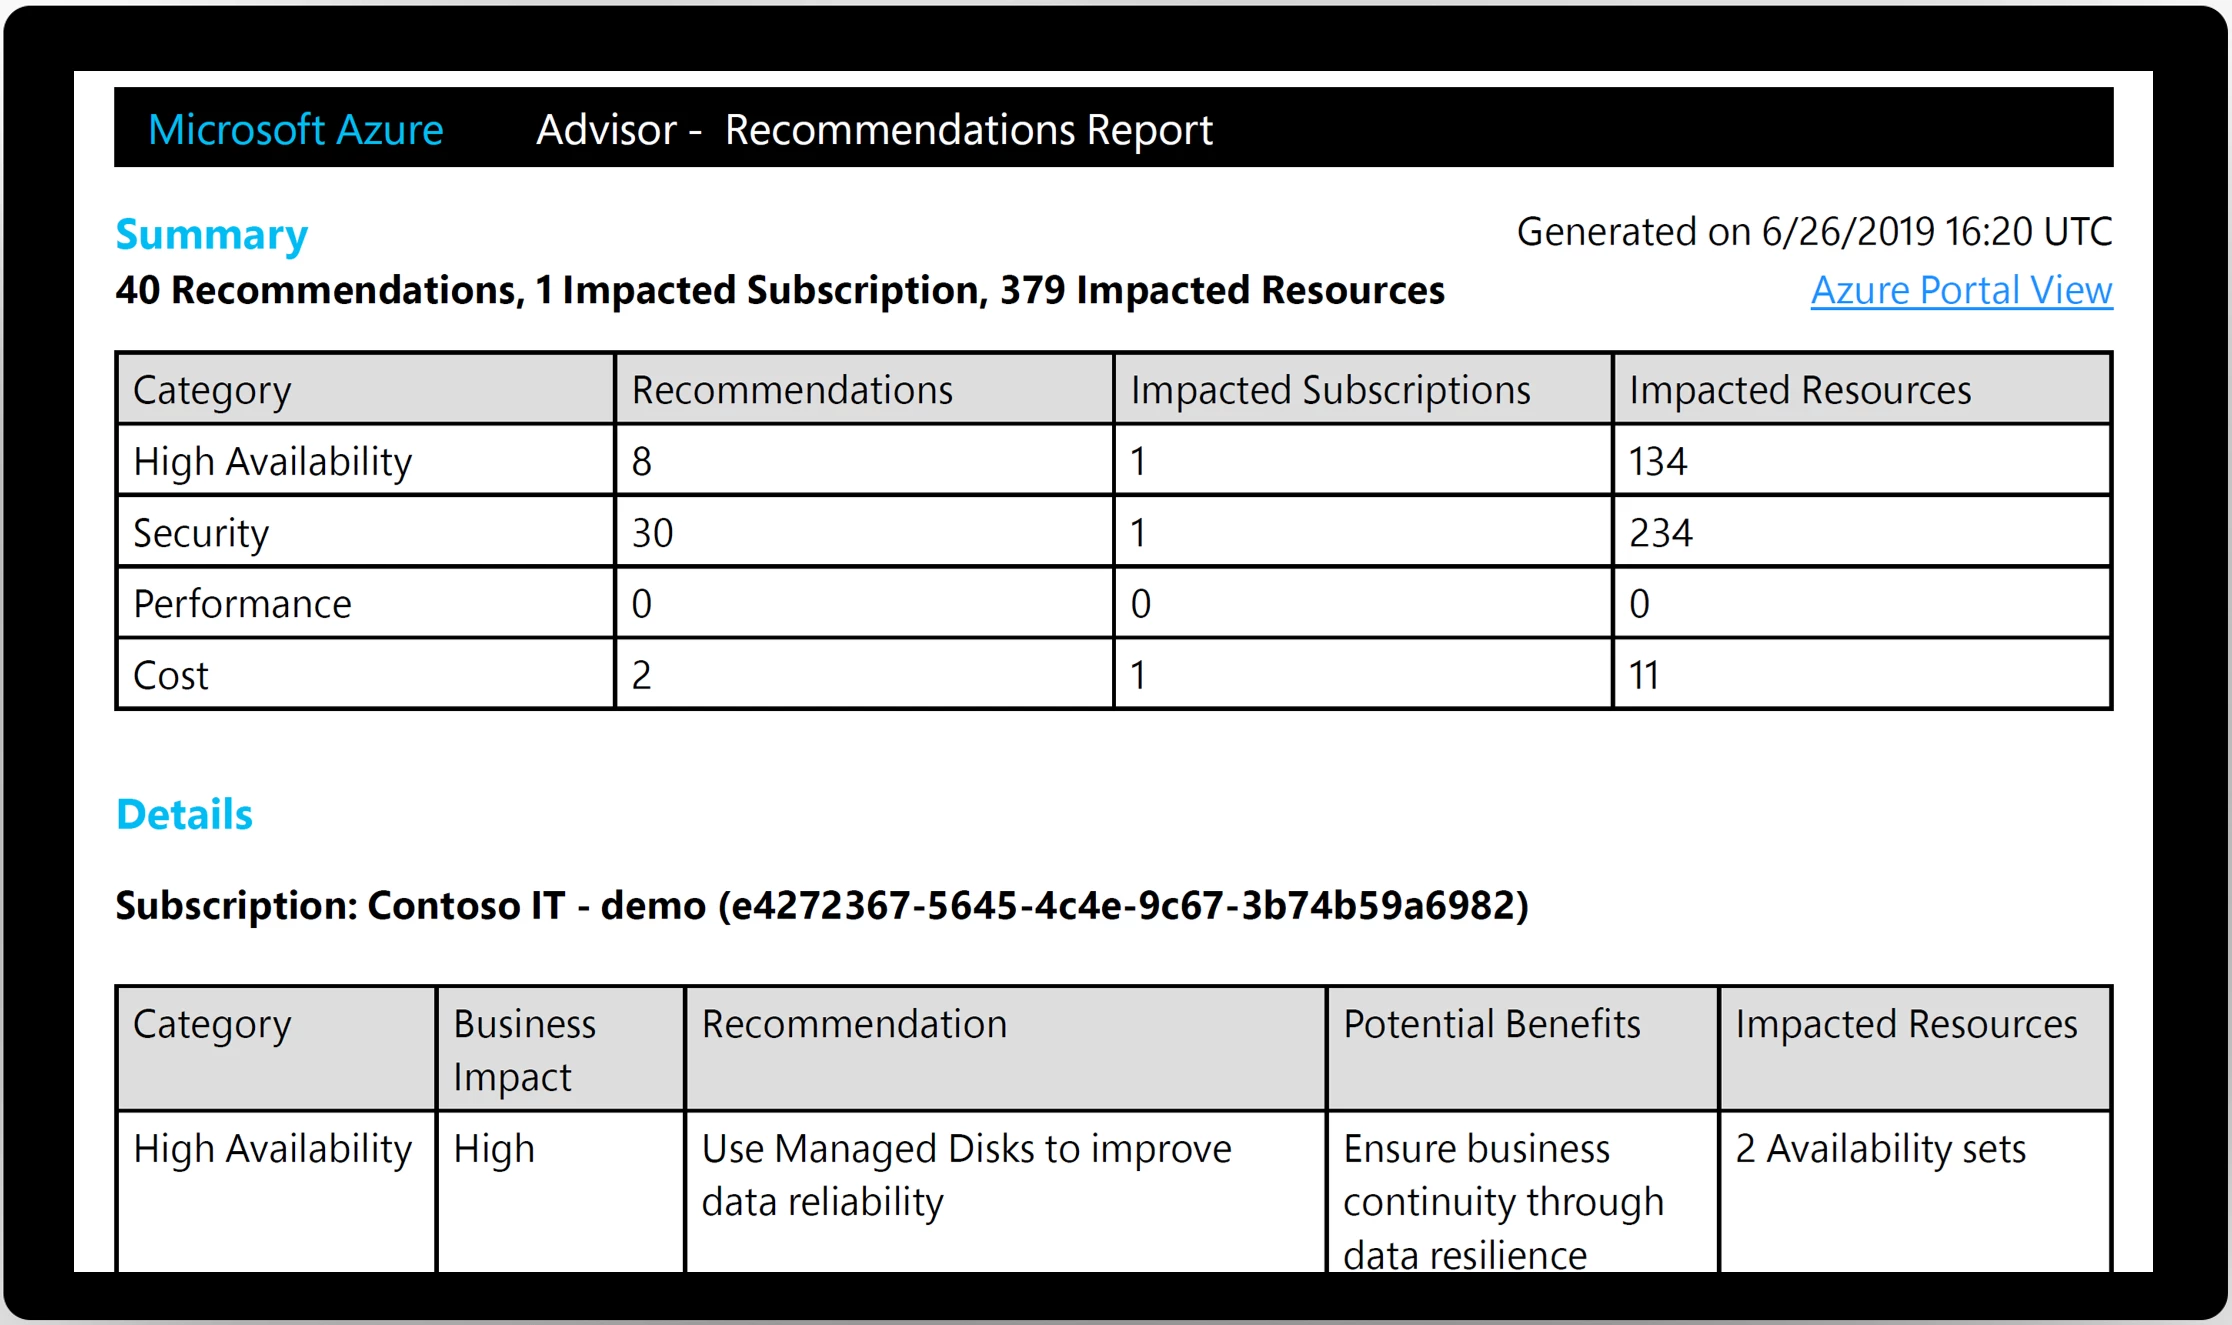 Screenshot displaying a summary of the Advisor recommendations by category, subscription, and potential business impact